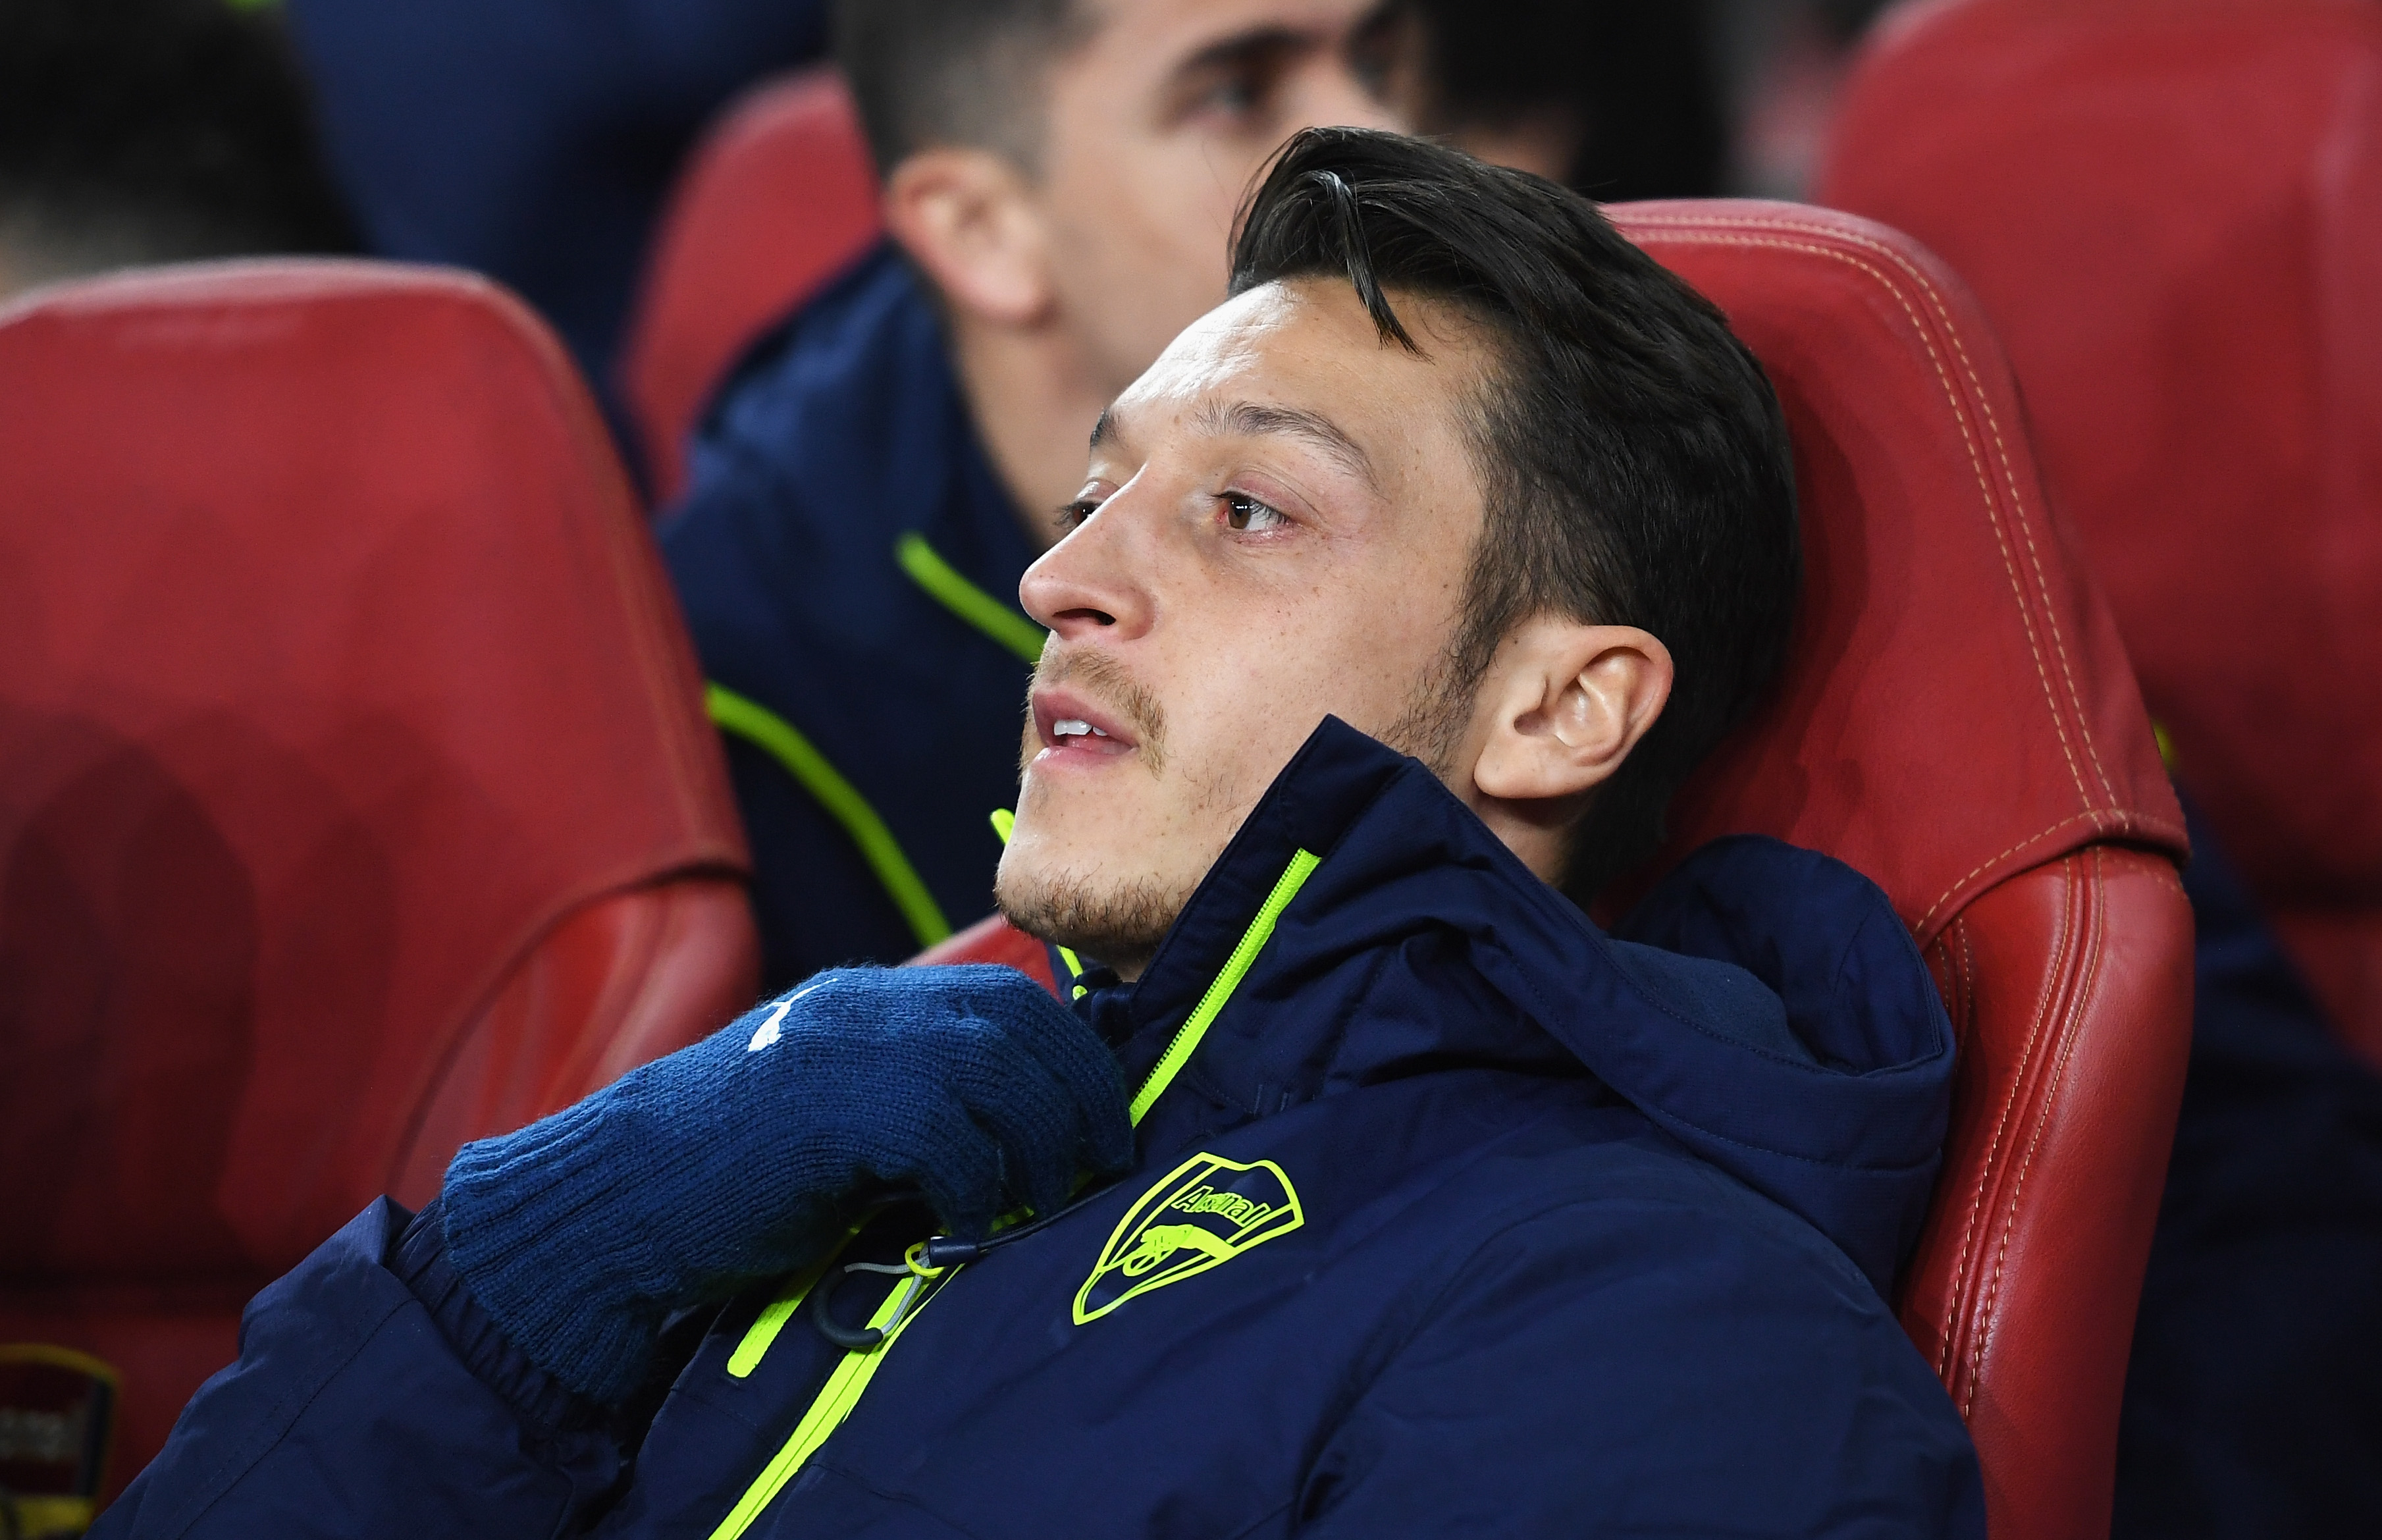 LONDON, ENGLAND - MARCH 07:  Mesut Oezil of Arsenal looks on from the bench prior to the UEFA Champions League Round of 16 second leg match between Arsenal FC and FC Bayern Muenchen at Emirates Stadium on March 7, 2017 in London, United Kingdom.  (Photo by Shaun Botterill/Getty Images)